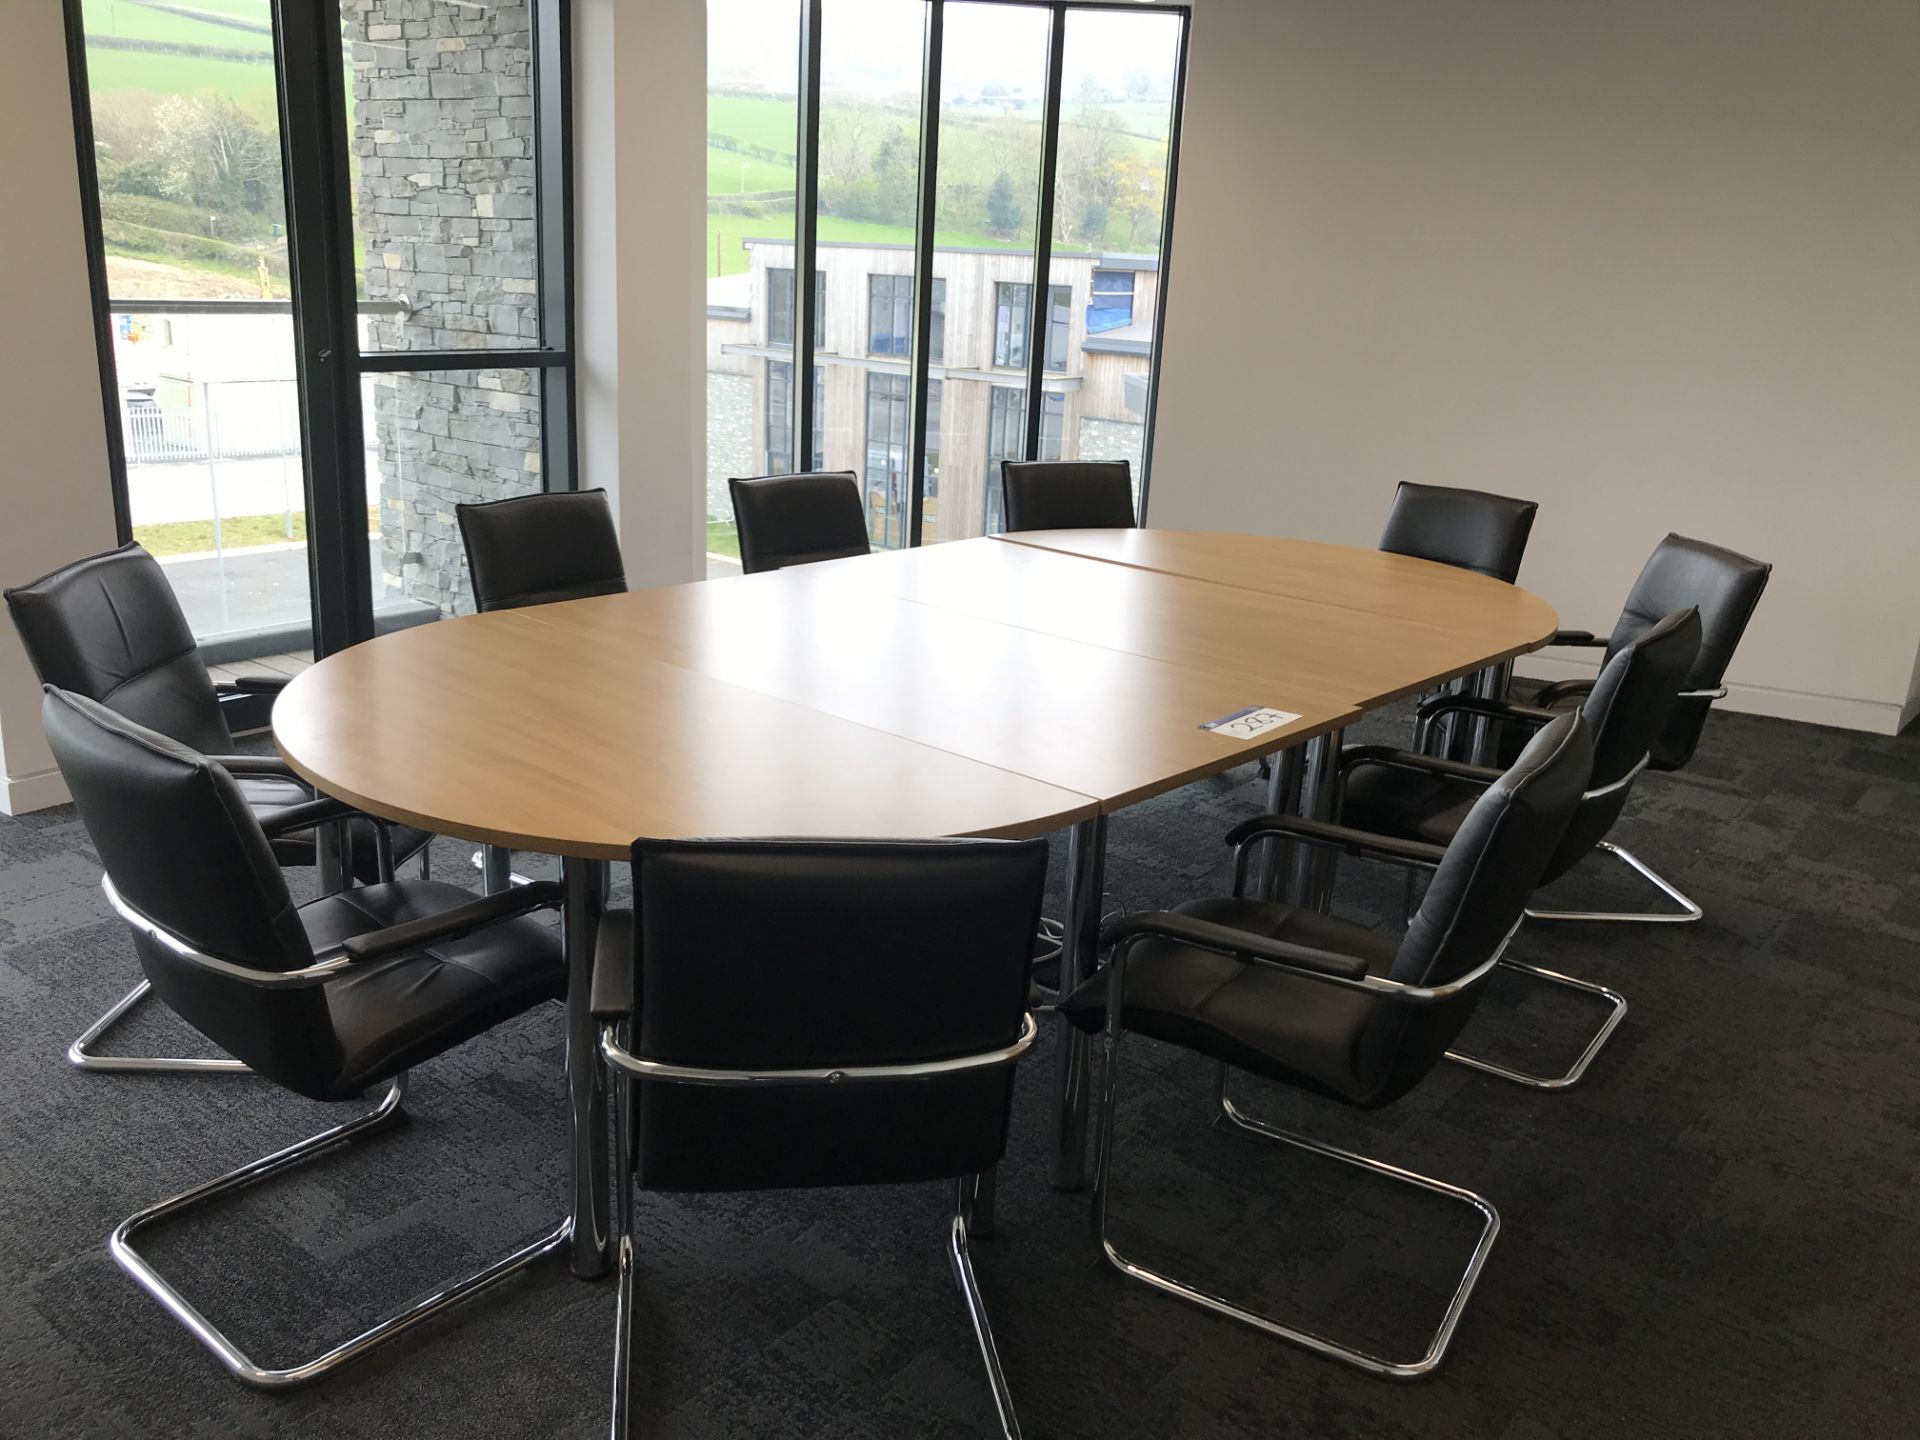 Four Section Curved Boardroom Table, approx. 3.2m x 1.6m, with ten leather effect upholstered